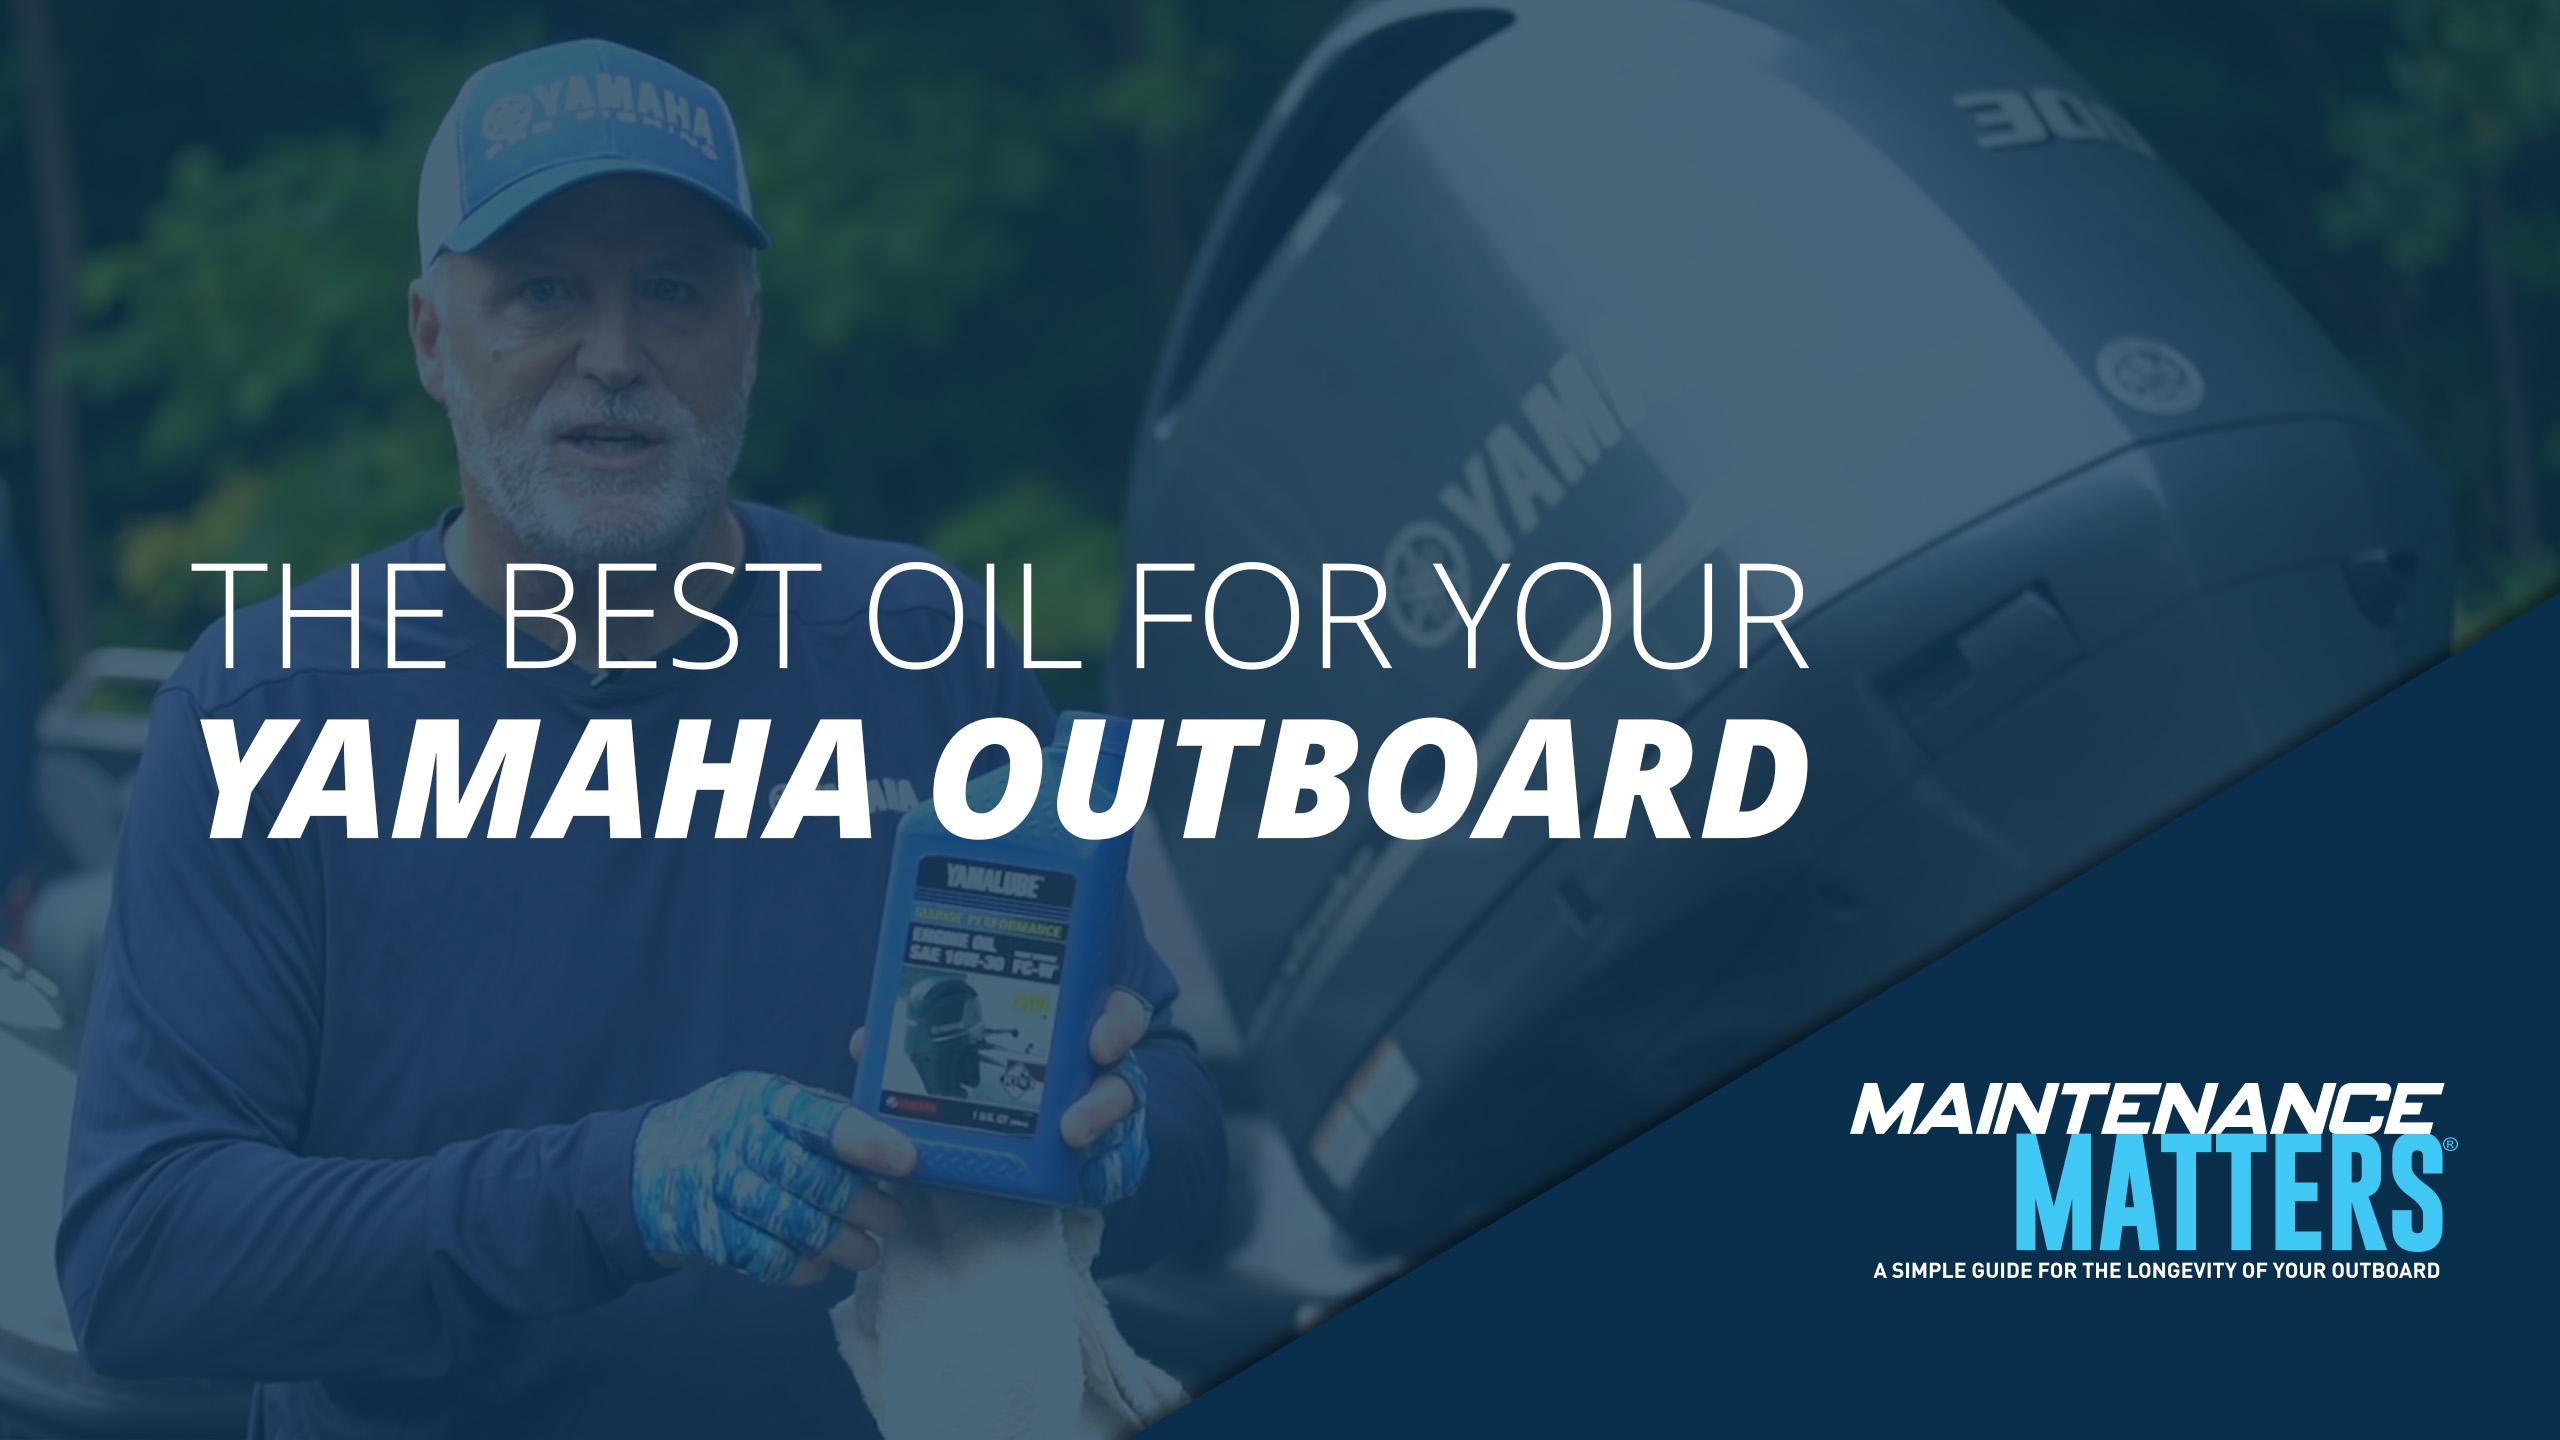 The Best Oil for your Yamaha Outboard